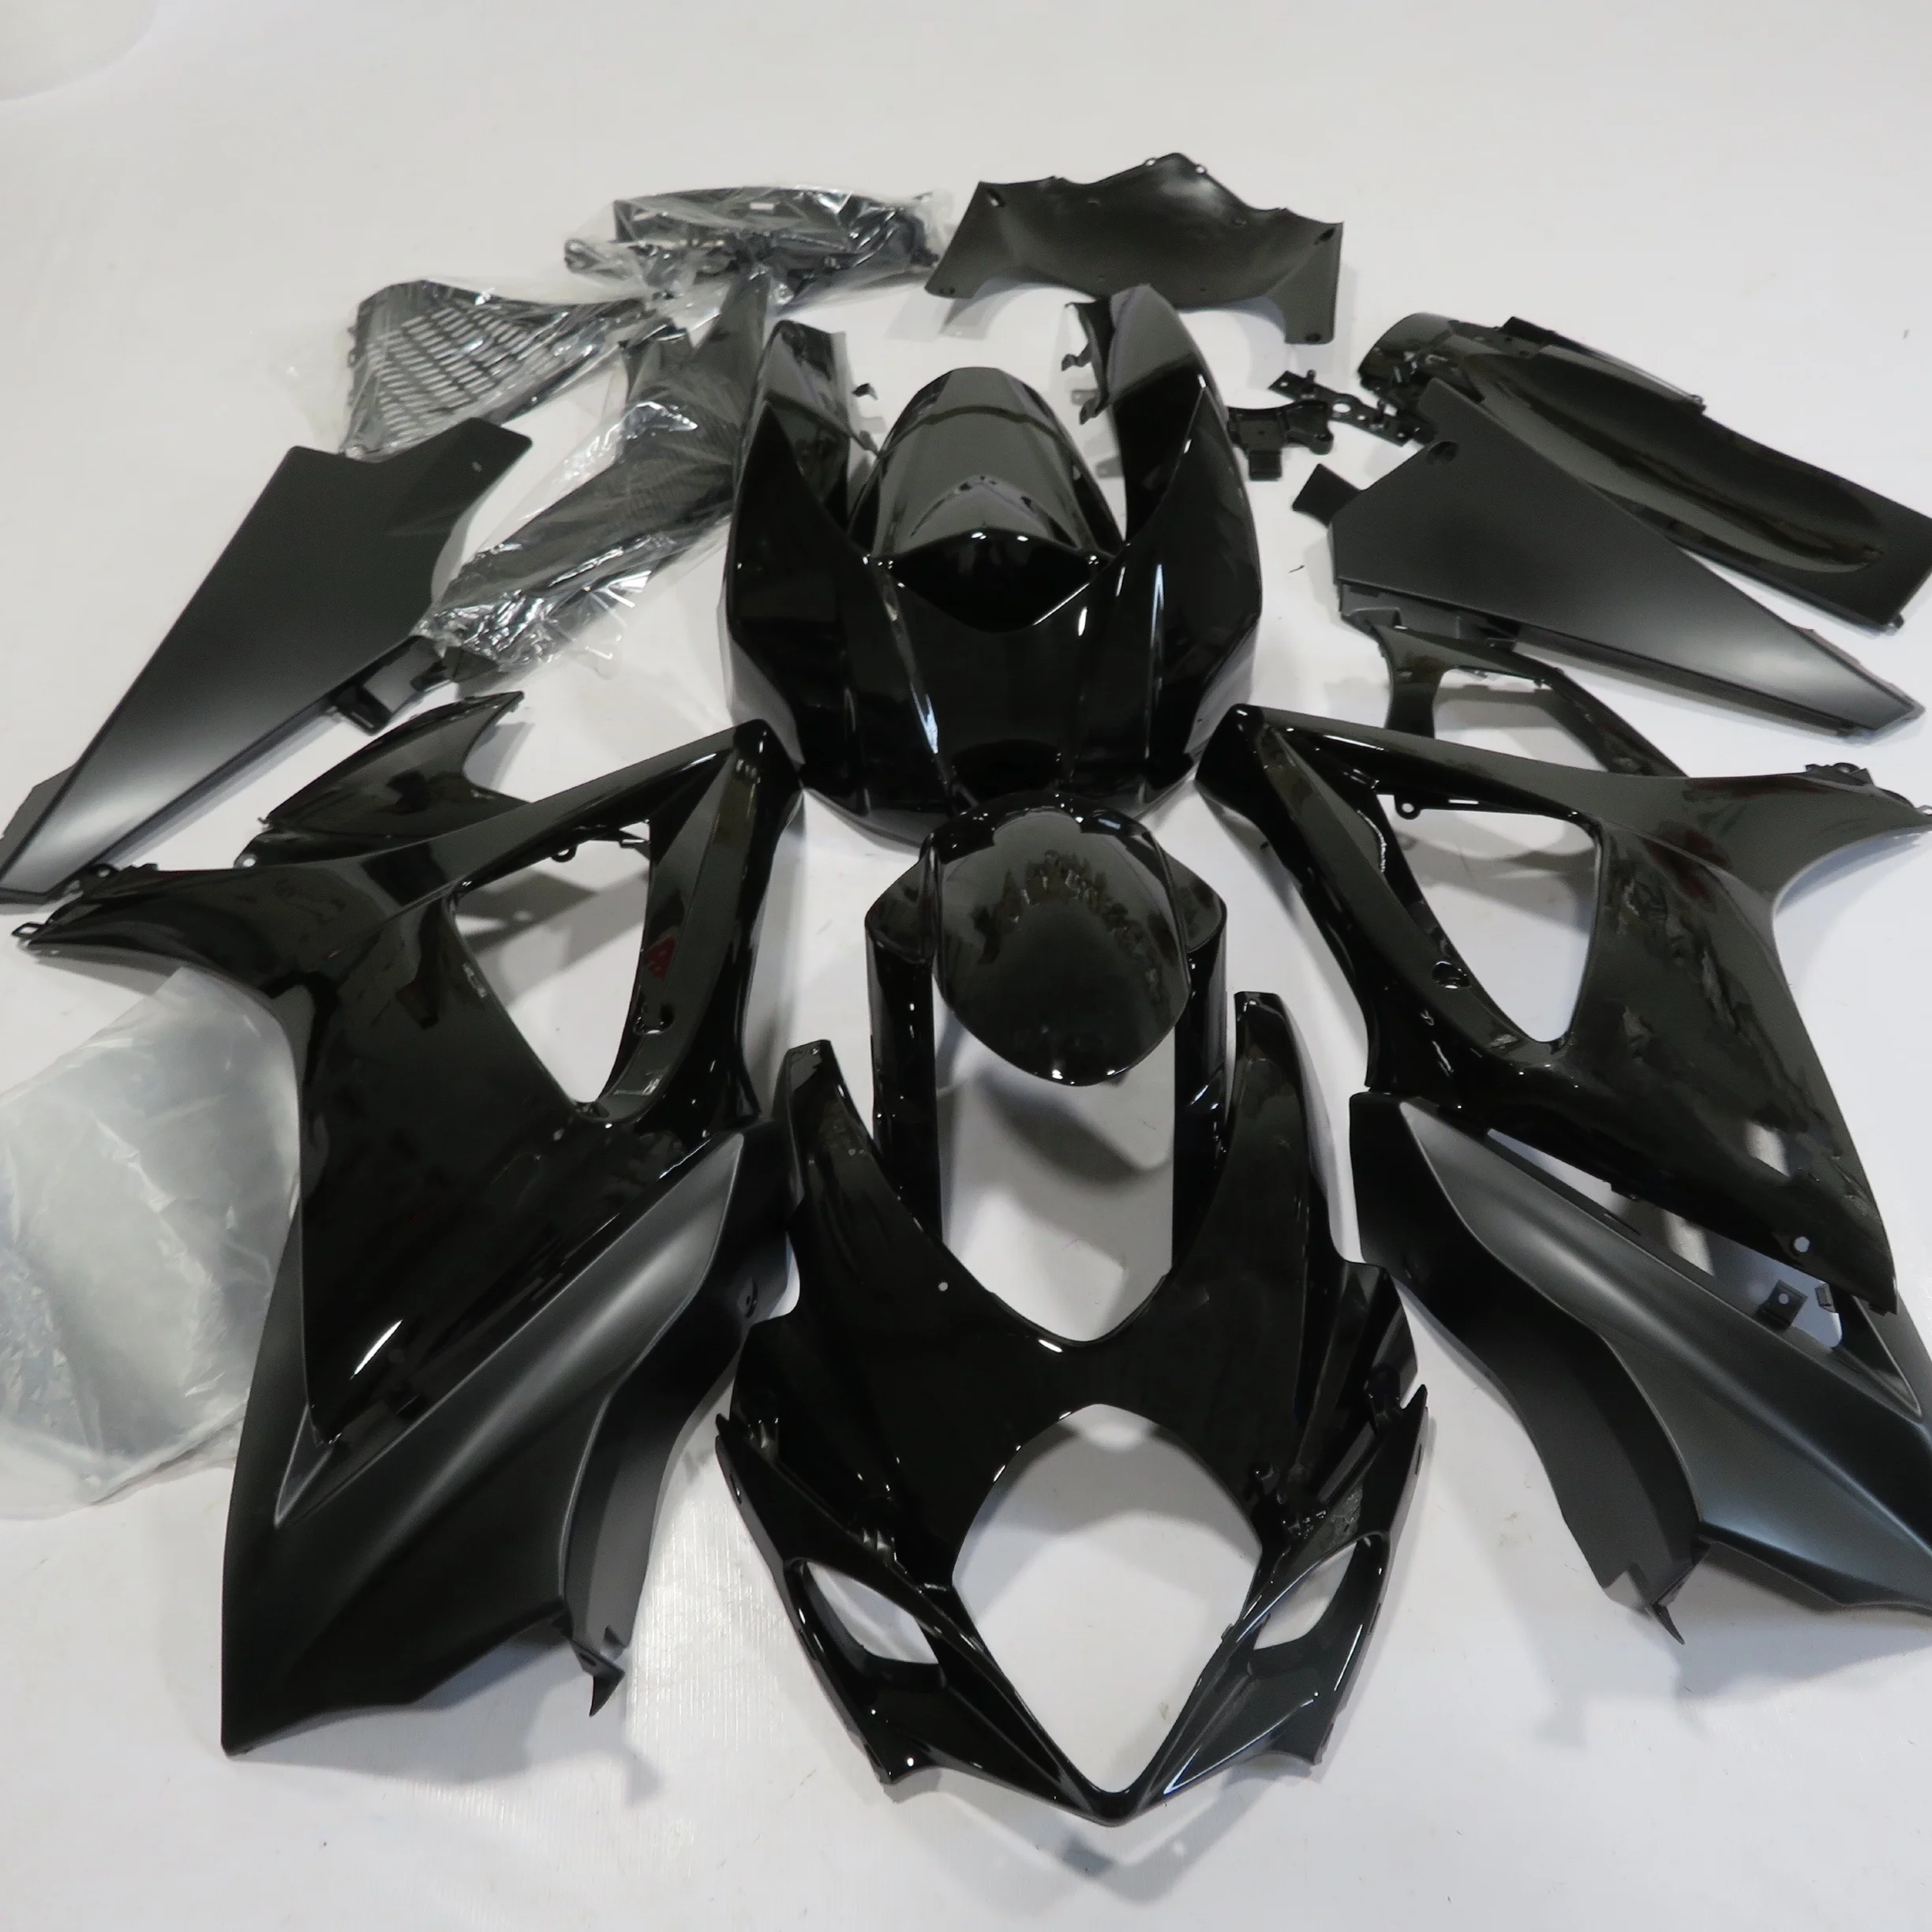 

2021 WHSC black Color Kit Motorcycle Body Kit For SUZUKI GXR1000 2007-2008 Motorcycle Fairing In Stock Ready To Ship, Pictures shown